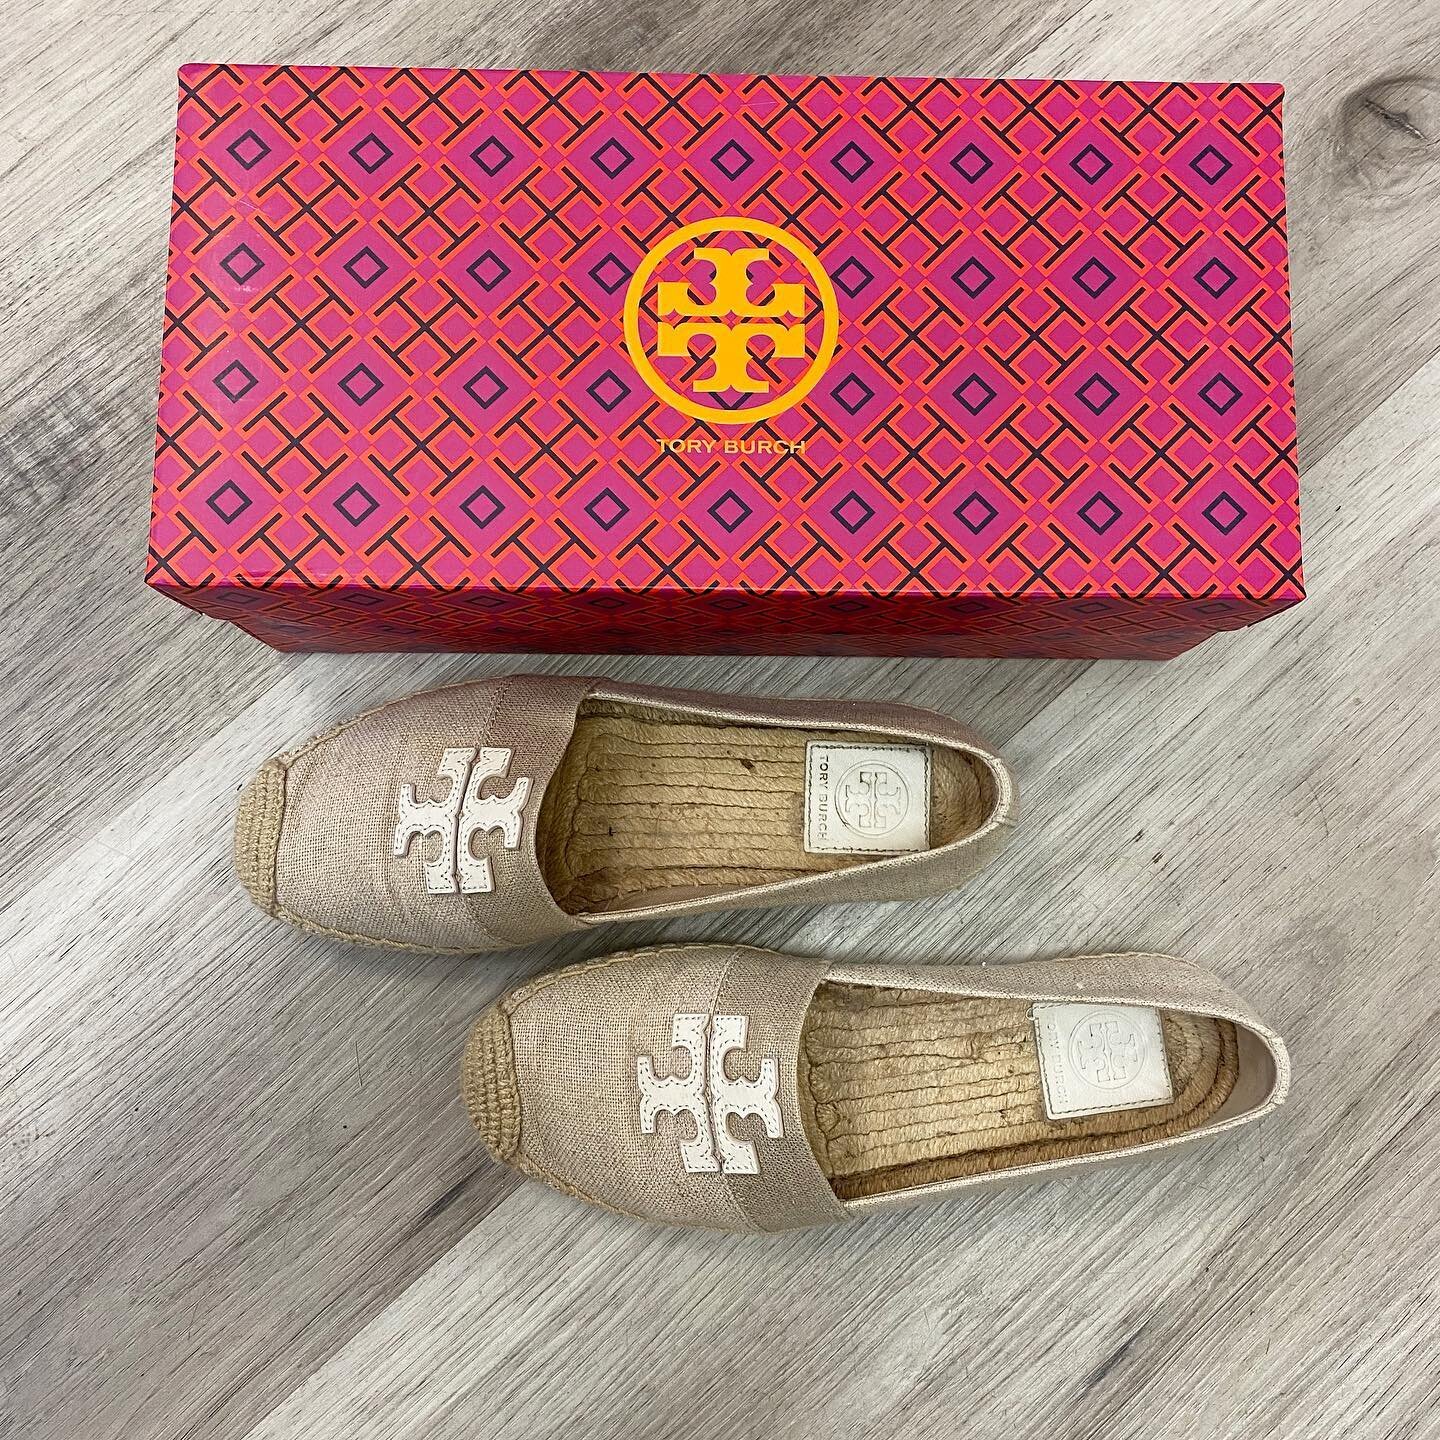 Metallic Linen Slip On #toryburch Espadrilles Size: 6.5 Retails at $228.00 Mint Price: $54.99

Don&rsquo;t forget we ship and offer curbside pickup! ♻️ Call 📞 703-836-6468 to buy today! ✅ Authenticity is guaranteed with a money back promise ✅ *Consi